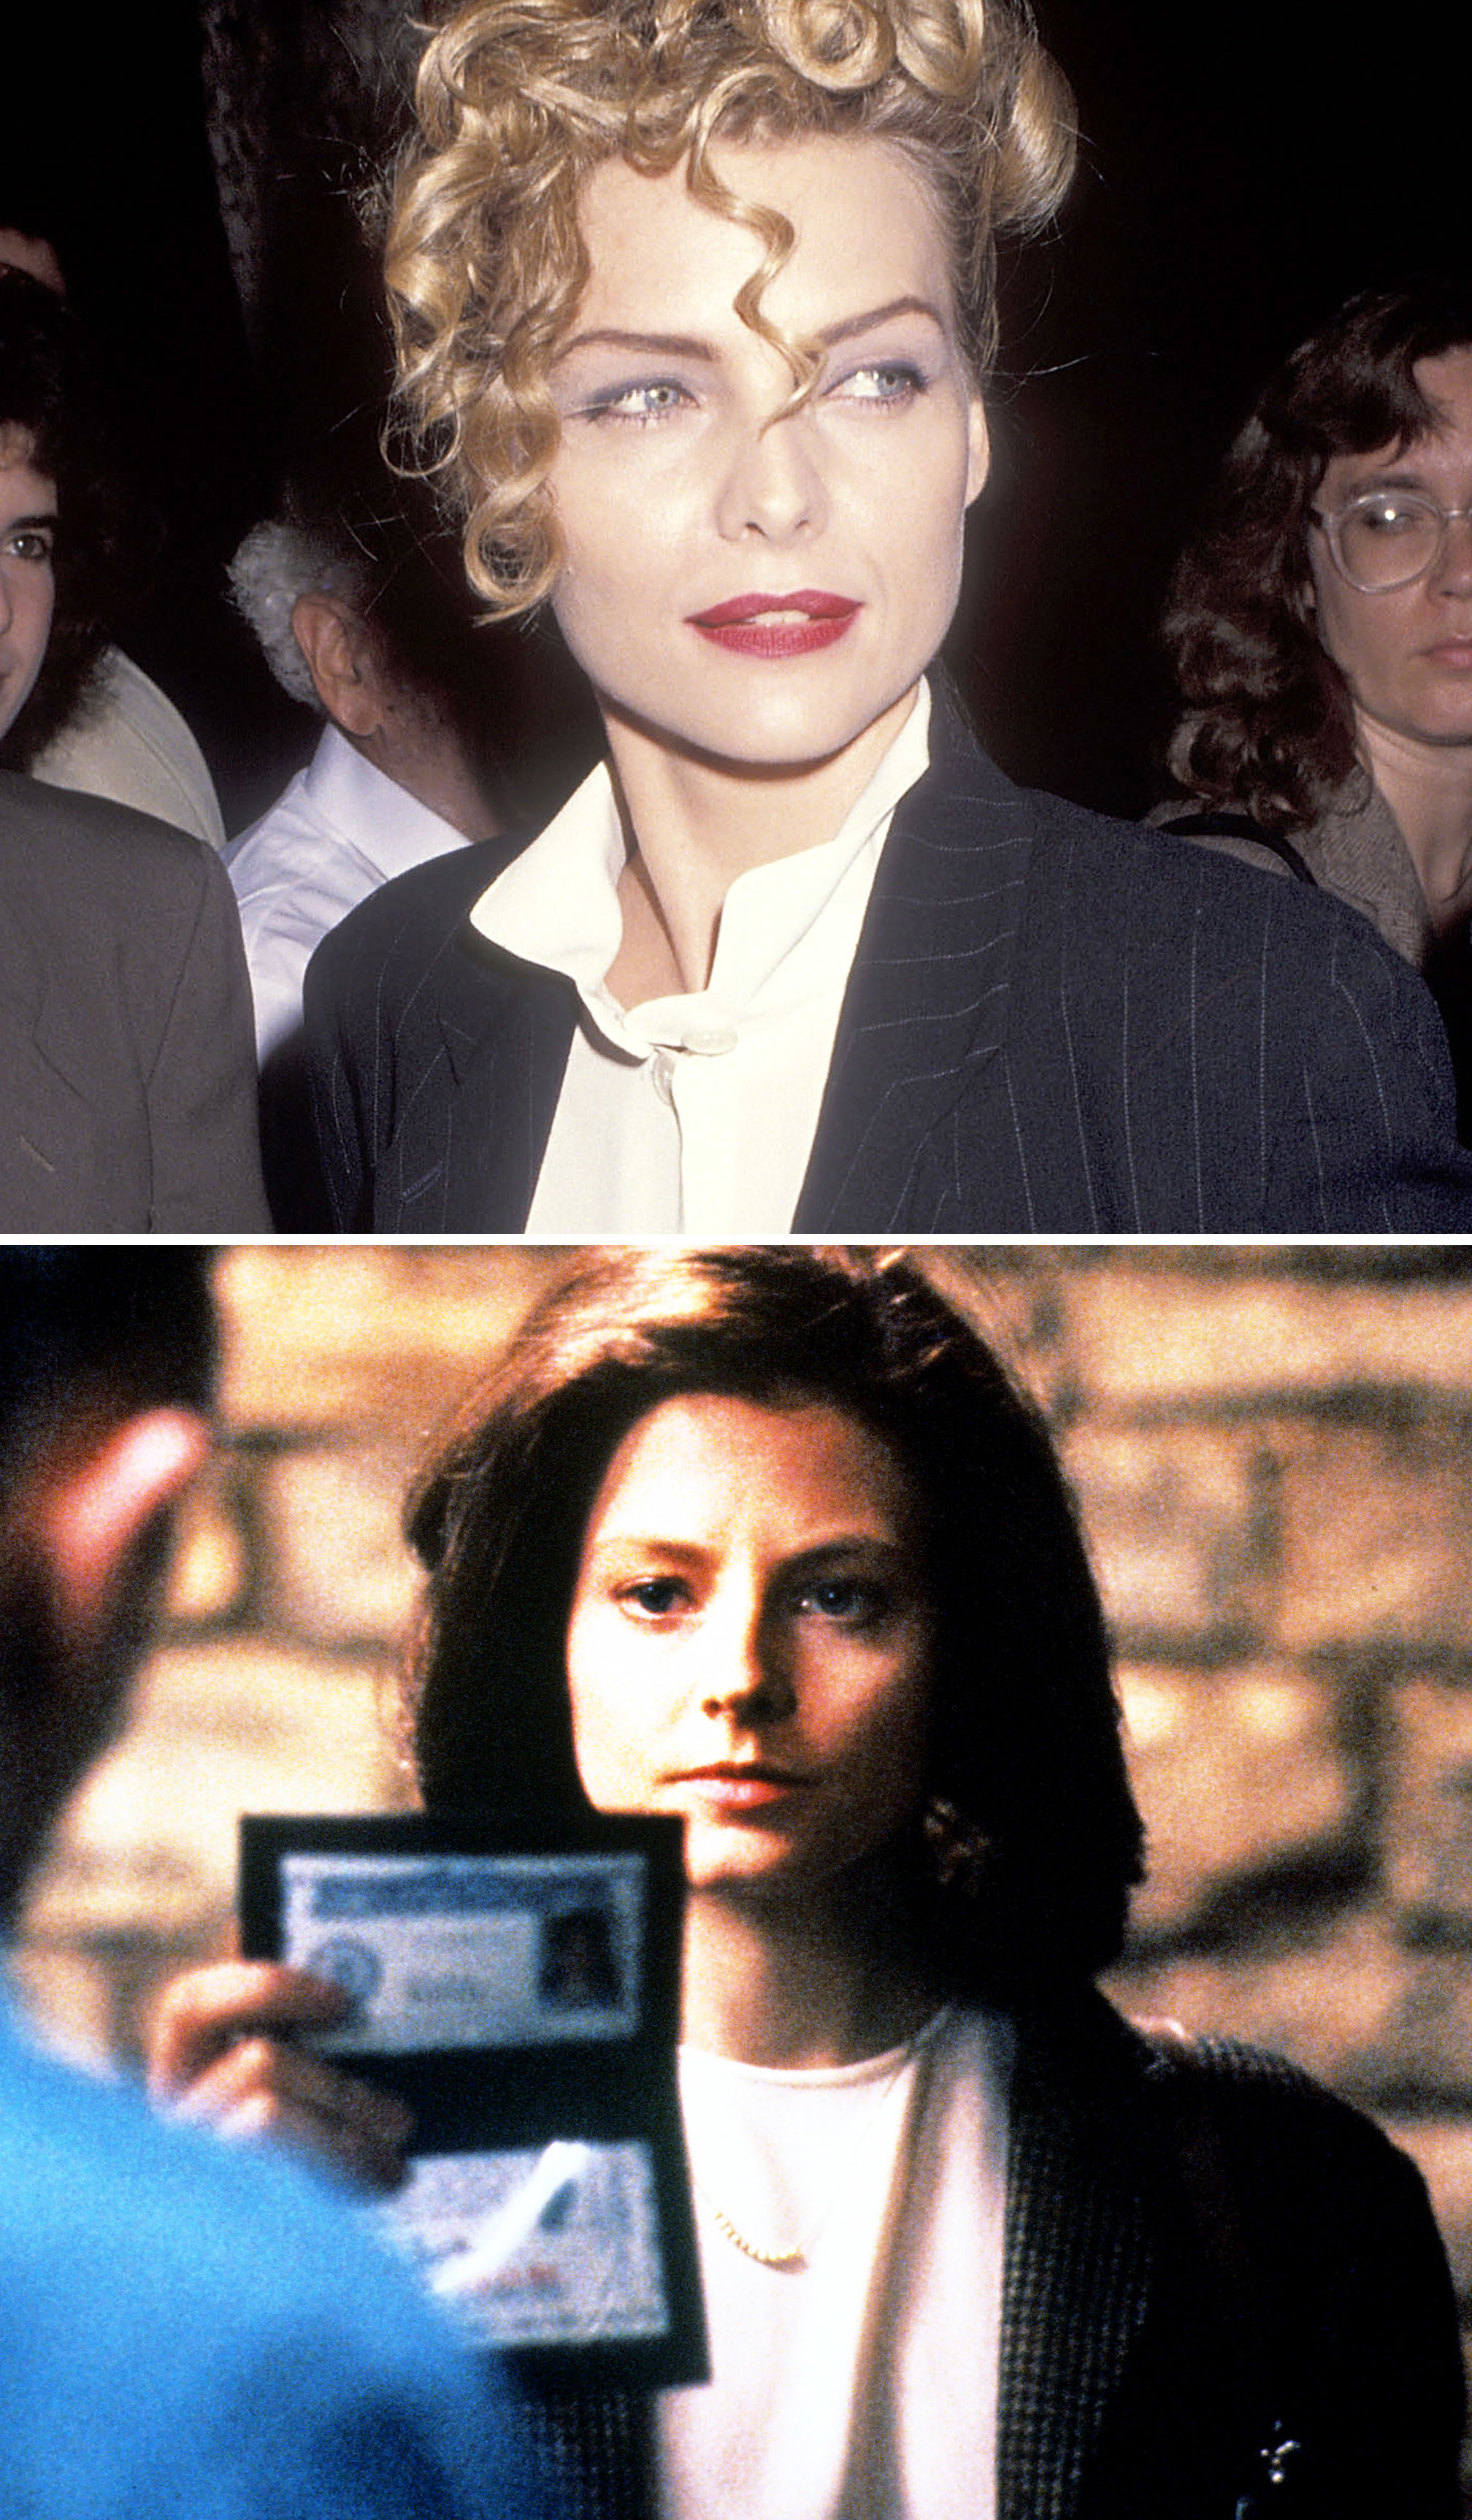 A close-up of Michelle above a shot of Jodie Foster in The Silence of the Lambs